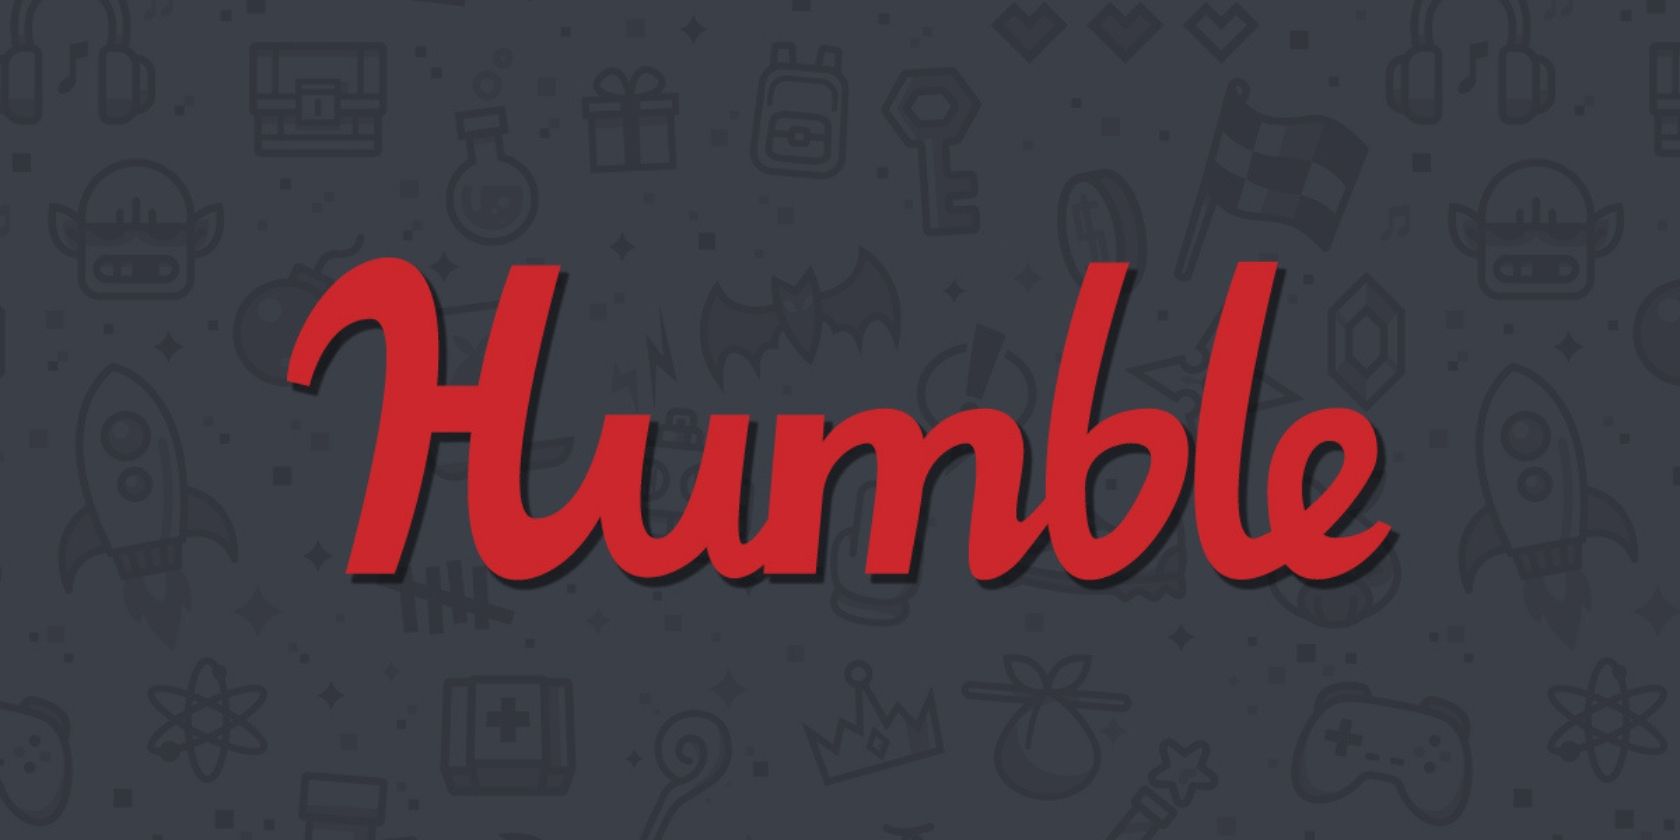 makeuseof.com - Kieran Robertson - How to Get the Best Deals on Video Games With Humble Bundle